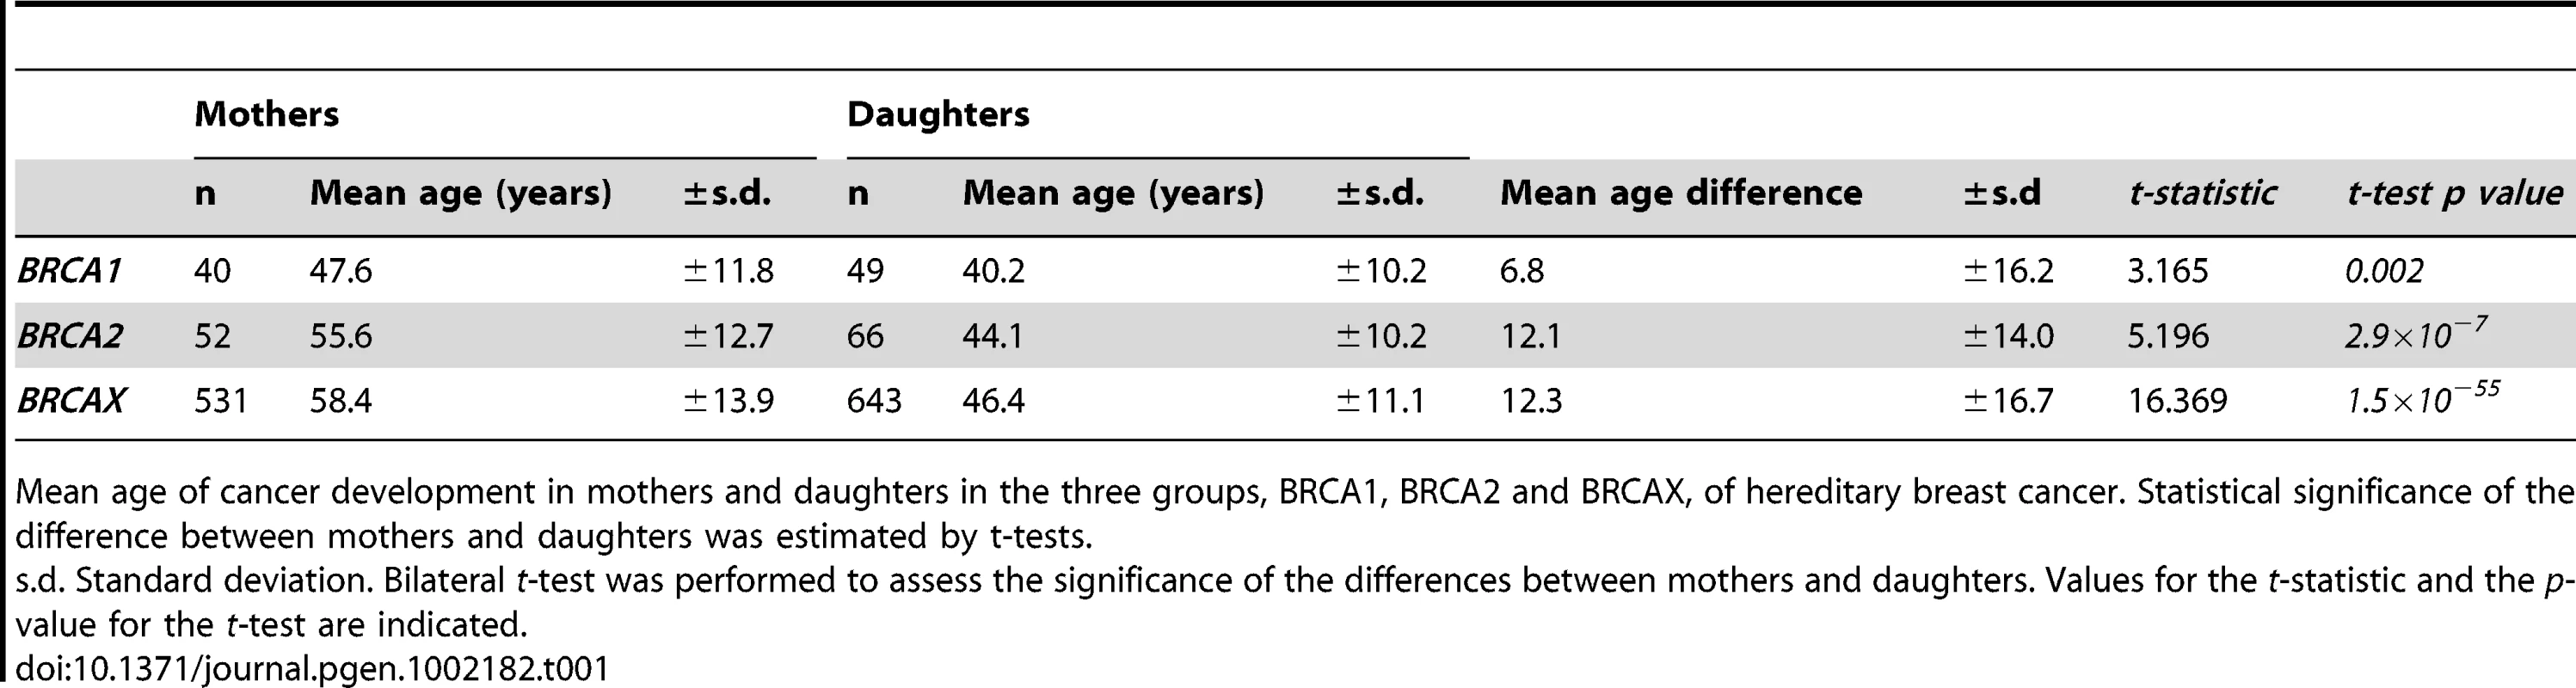 Difference in the age of onset of breast cancer between mothers and daughters in hereditary breast cancer.